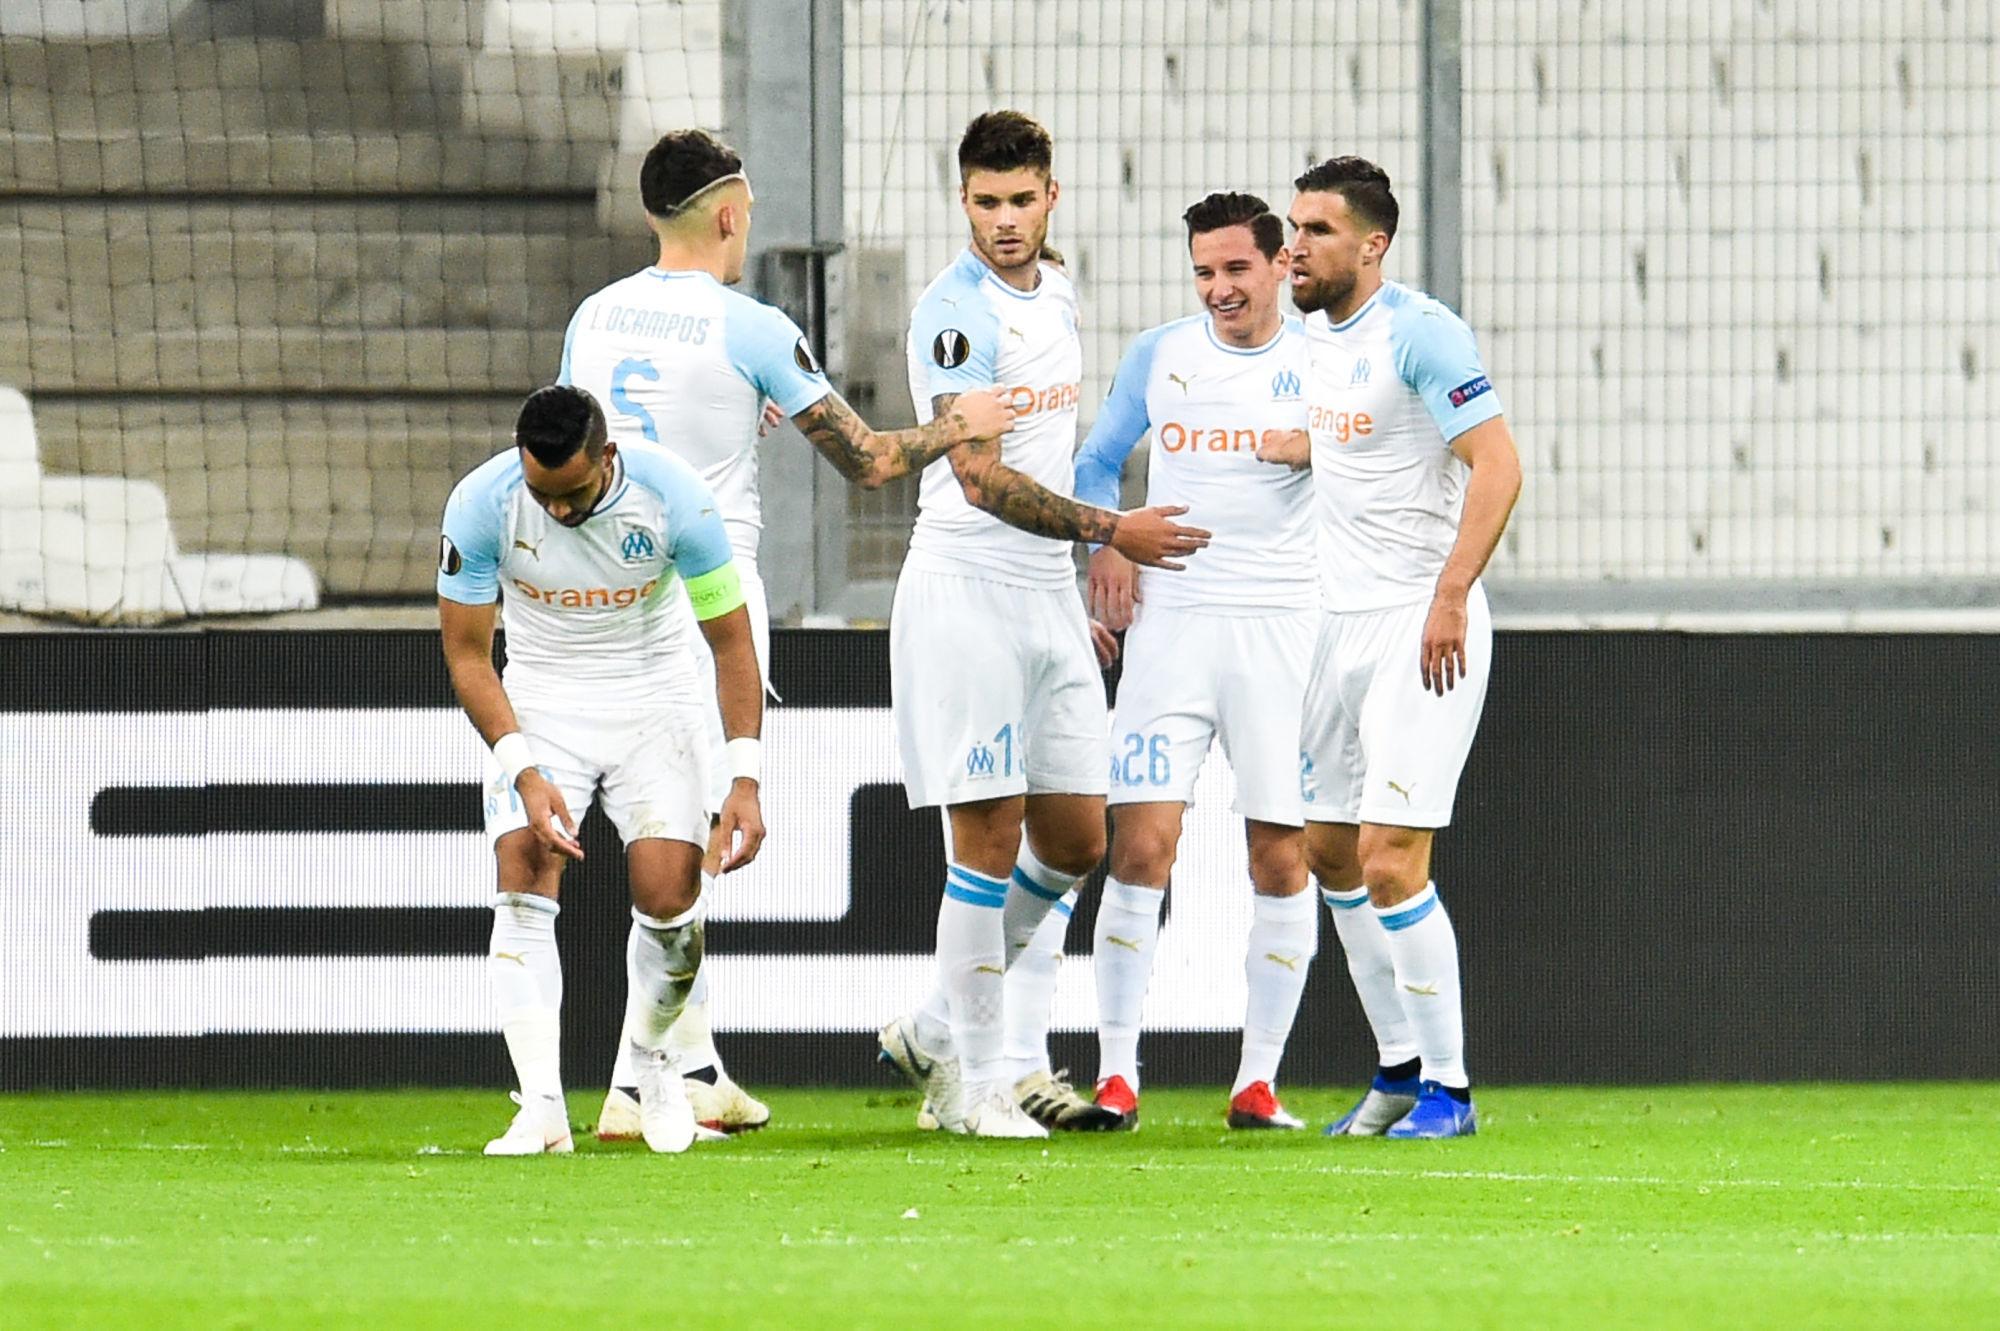 (l-r) Dimitri Payet, Lucas Ocampos, Dujet Caleta Car, Florian Thauvin and Kevin Strootman celebrate the first goal during the Europa League match between Olympique Marseille and Apollon Limassol on December 13, 2018 in Marseille, France. (Photo by Alexandre Dimou/Icon Sport)